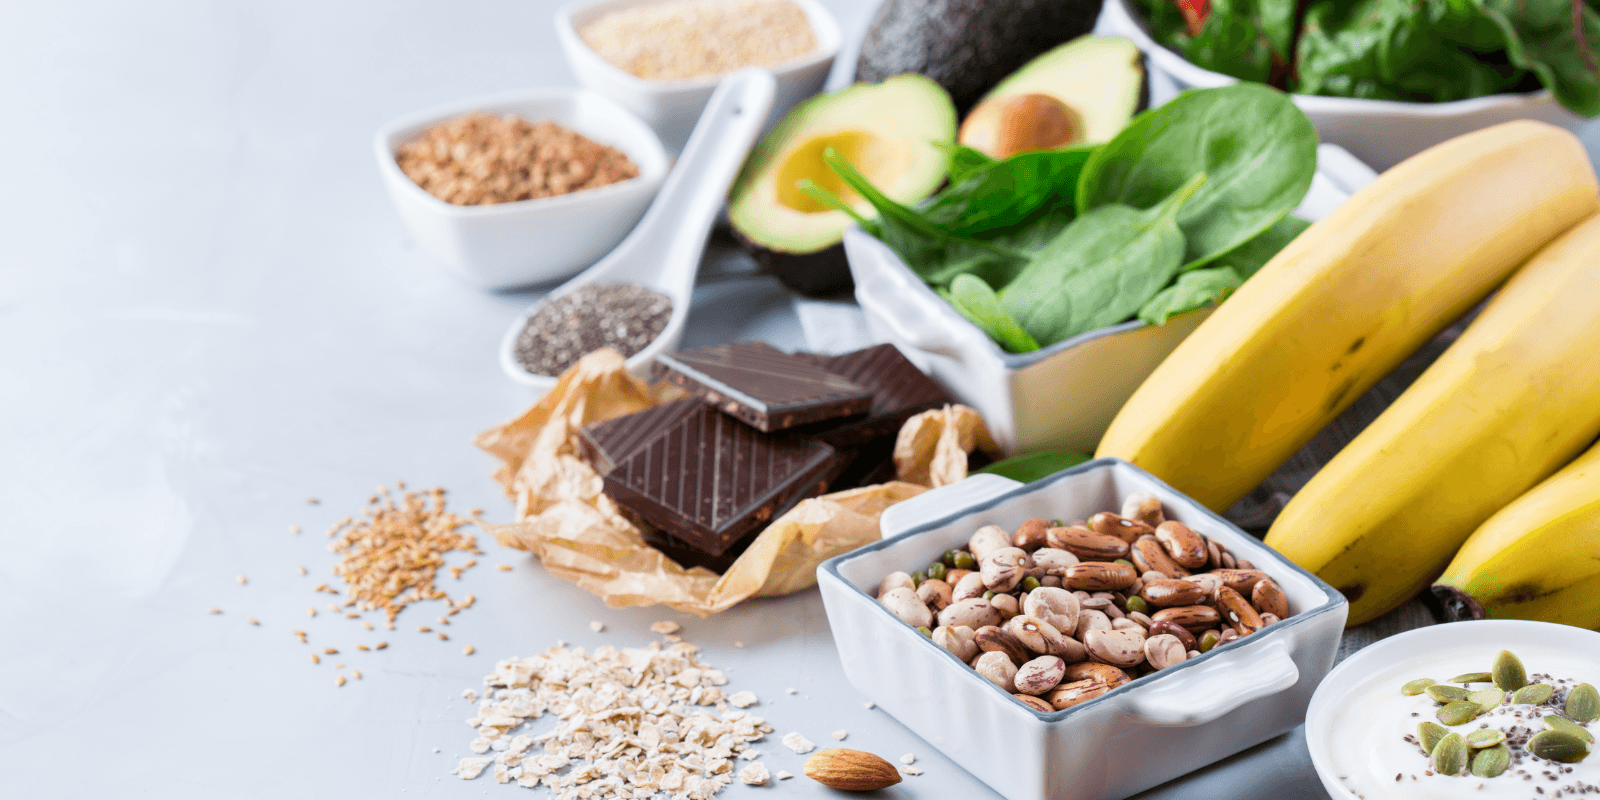 Magnesium rich foods can lead to a balanced diet.